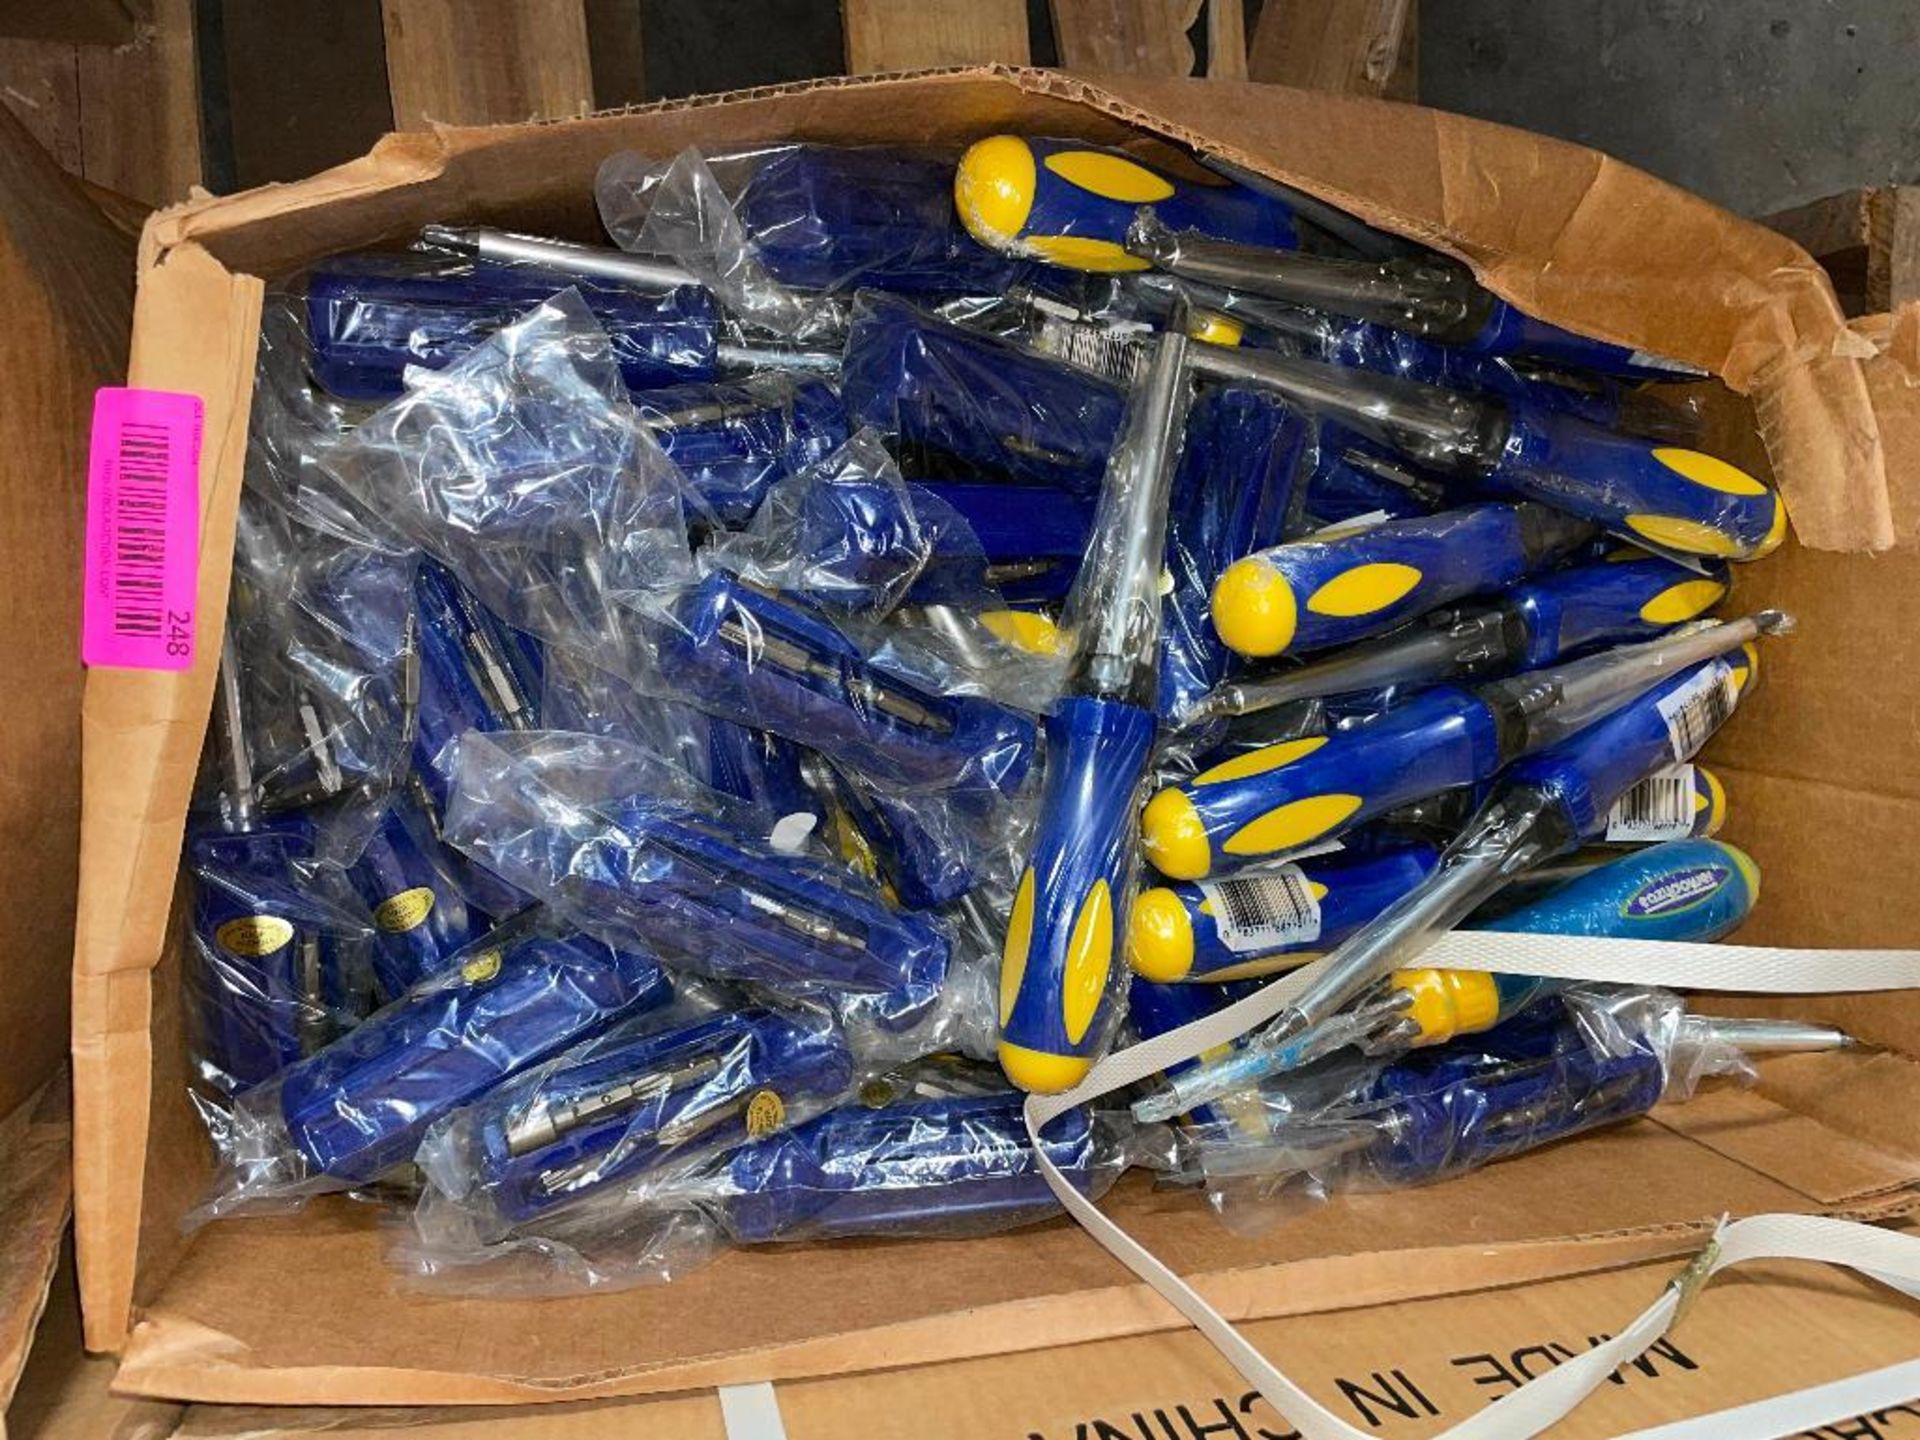 (1) BOX OF EAZY POWER 25 IN 1 SCREW DRIVERS. APPROX 100 IN BOX. ADDITIONAL INFORMATION RETAILS FOR $ - Image 3 of 3